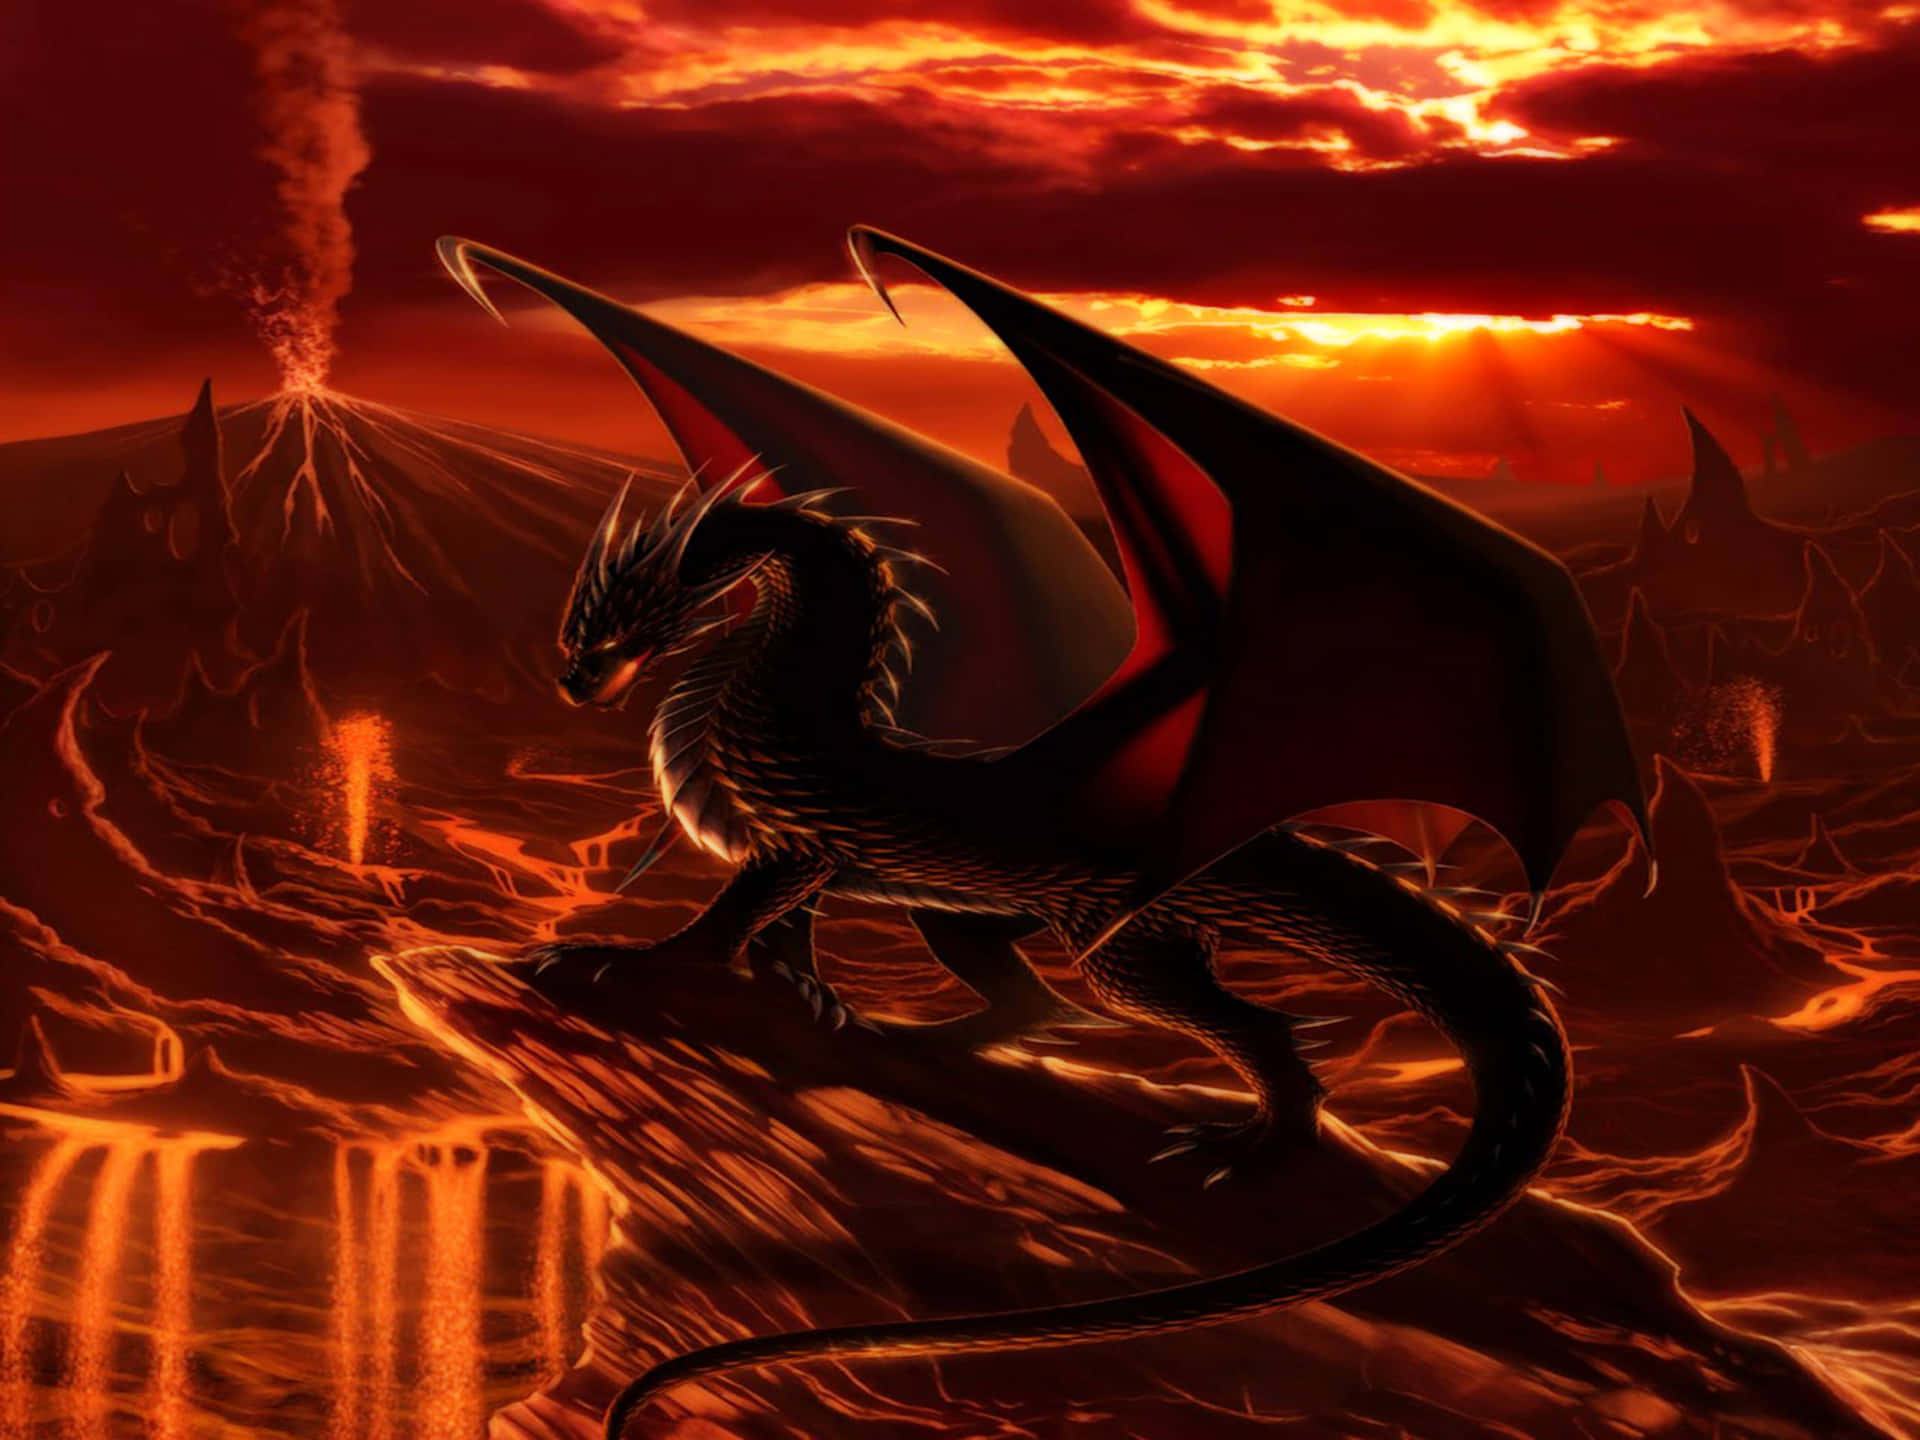 "Look at this awesome dragon as it soars with wings of fire!" Wallpaper